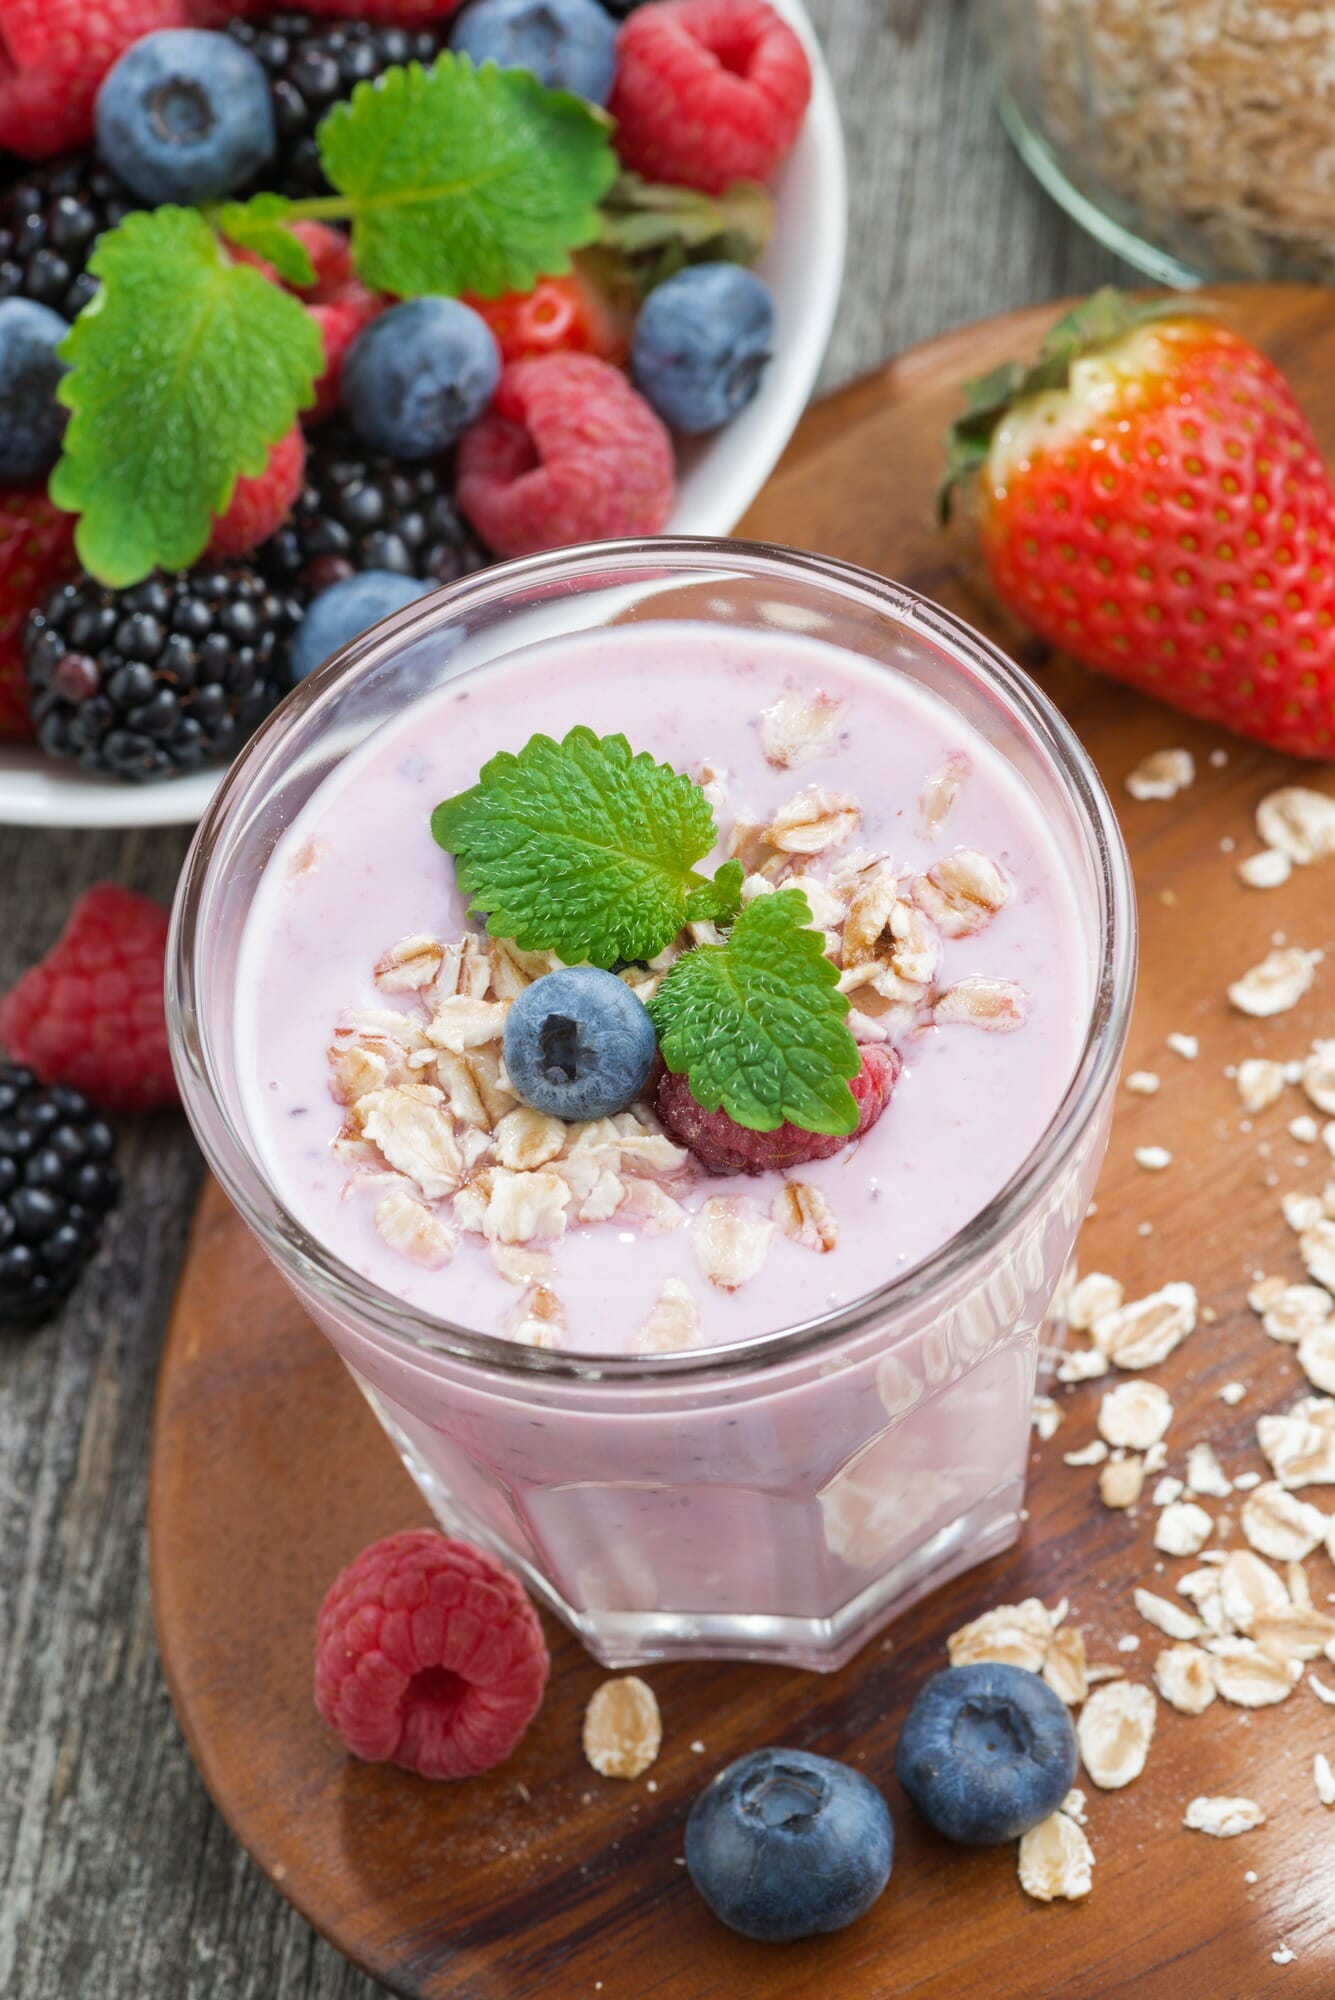 Looking for healthy smoothies for breakfast? You’ll love this collection of 15 healthy & easy smoothies for breakfast! Whether you’re looking for weight loss smoothies for breakfast, or smoothies for kids this list has you covered with the best protein and energy smoothie recipes! If you’re looking for dairy free, almond milk, or smoothies made with yogurt and oatmeal this collection has a breakfast smoothie for you! From strawberry and peanut butter banana smoothies to fat burning spinach energy smoothies you’ll find a smoothie for breakfast here!